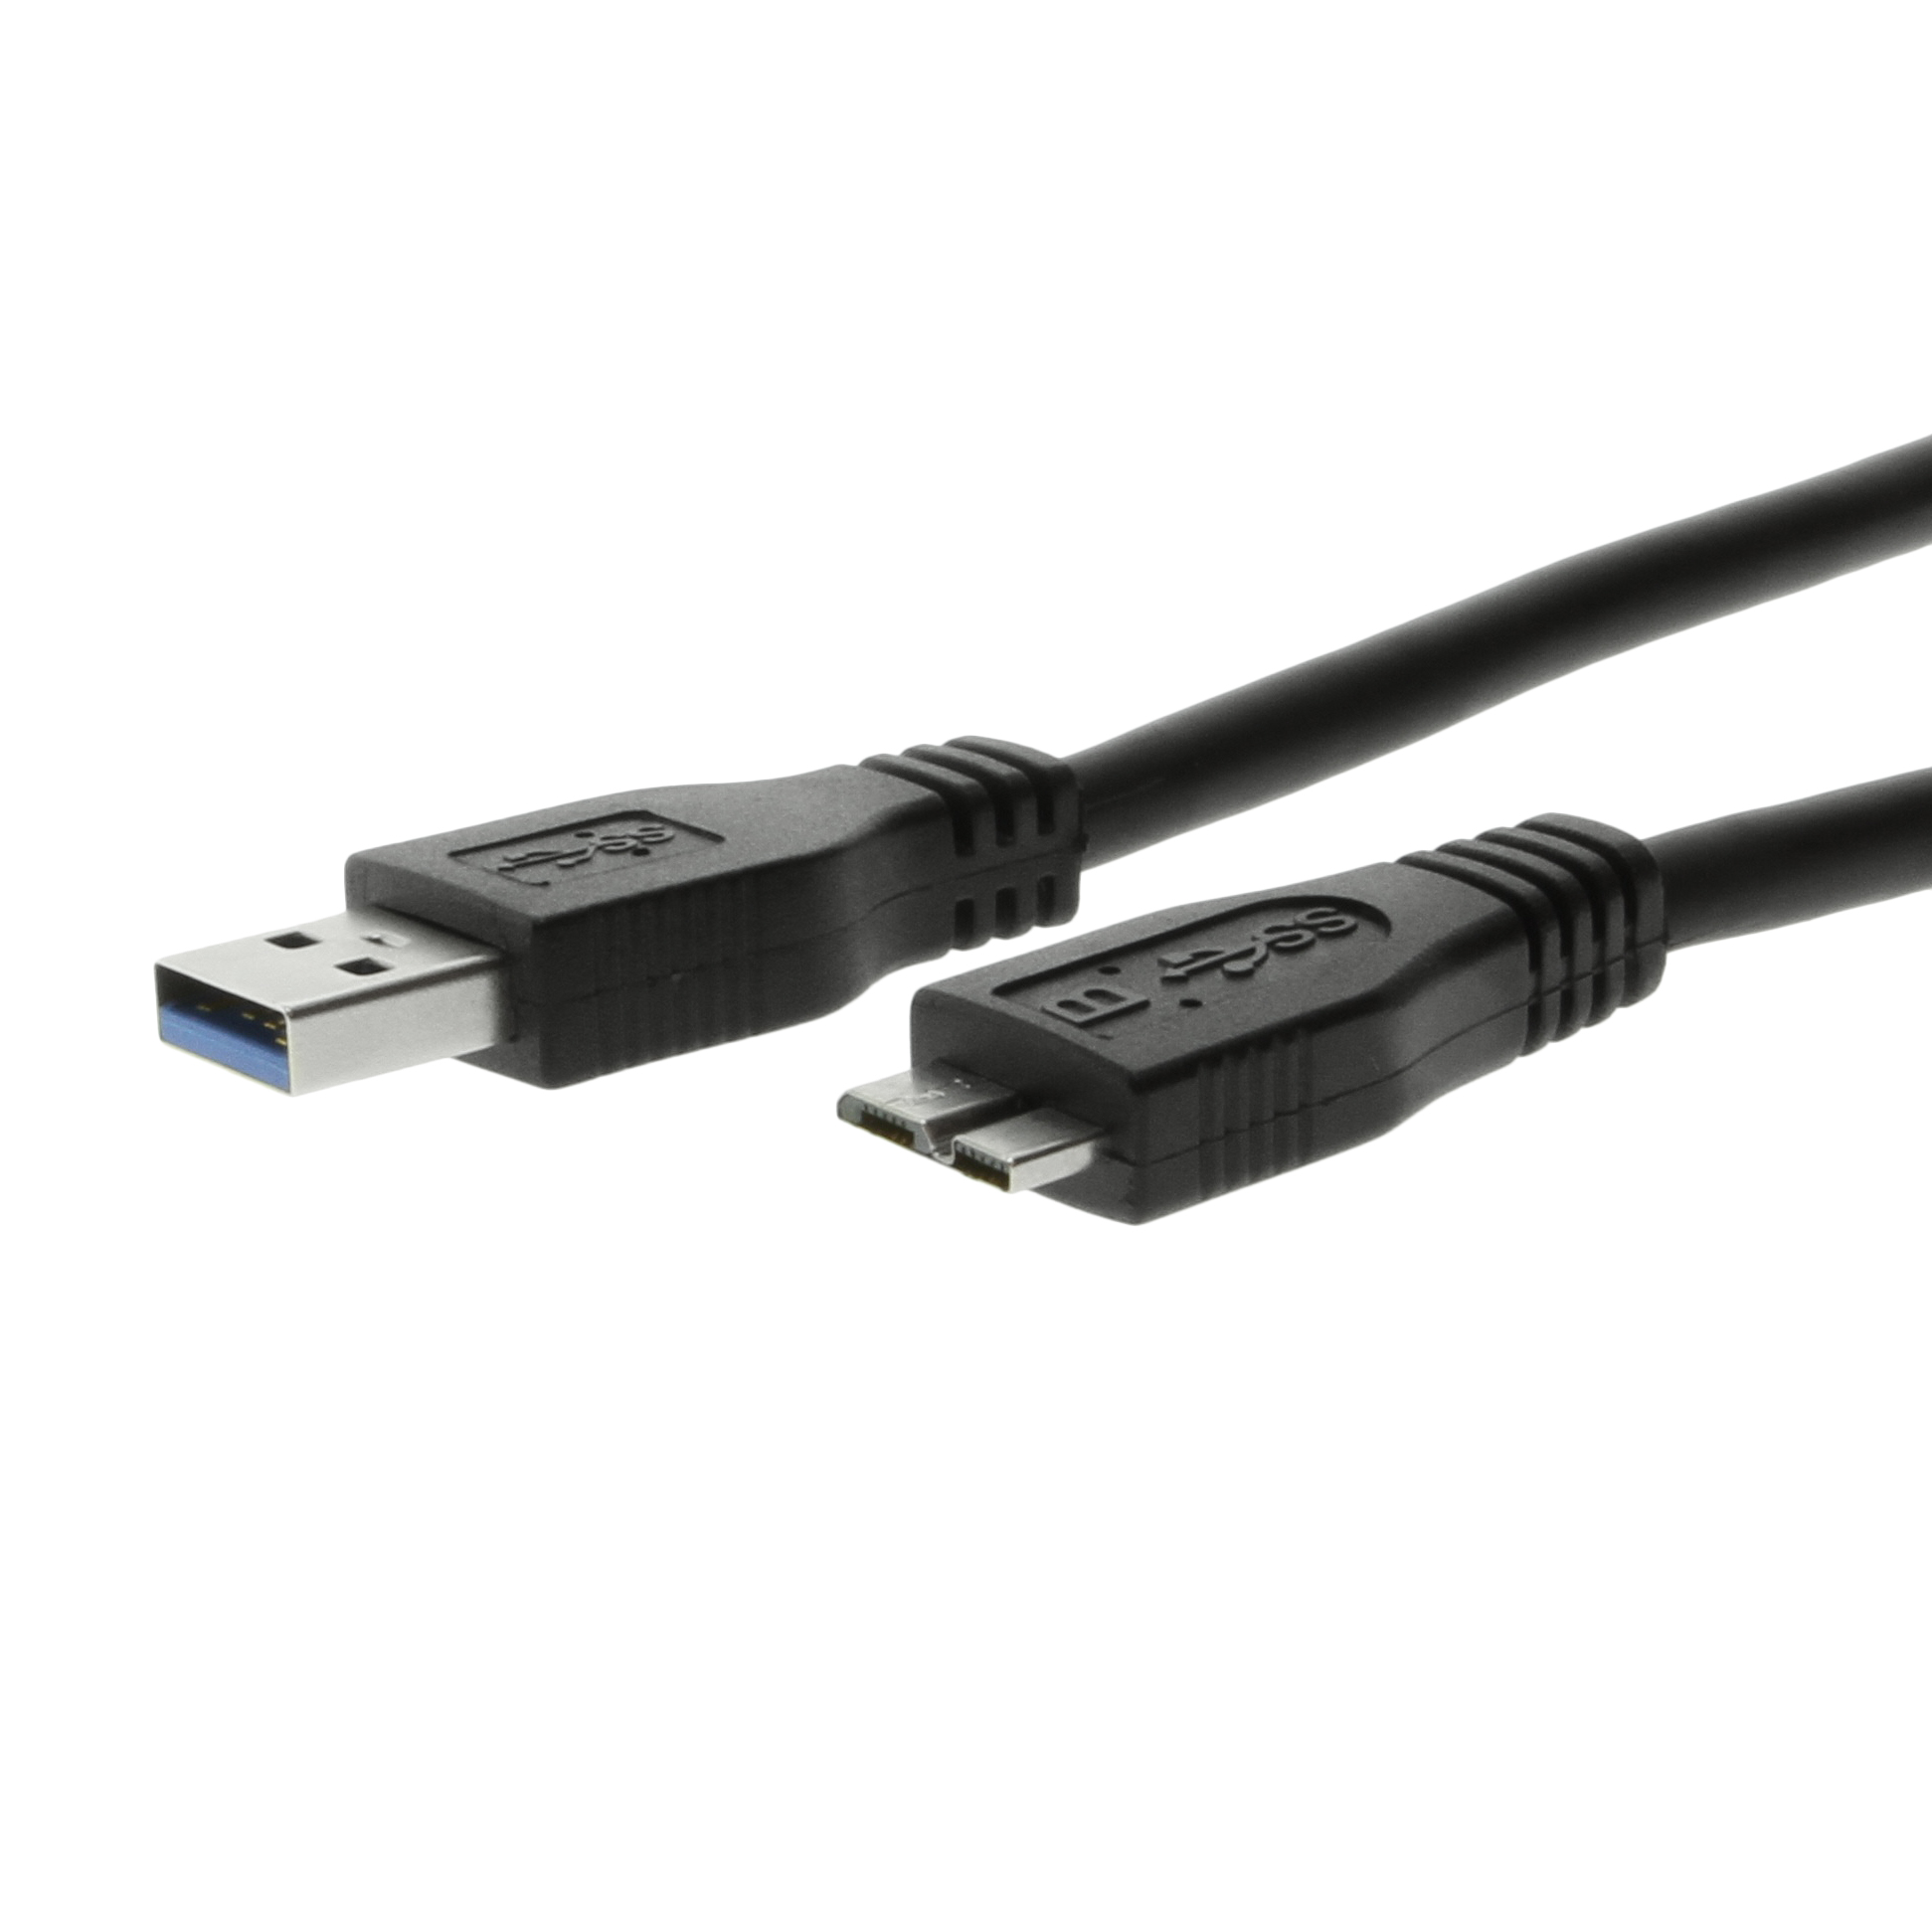 Cable USB 3.0